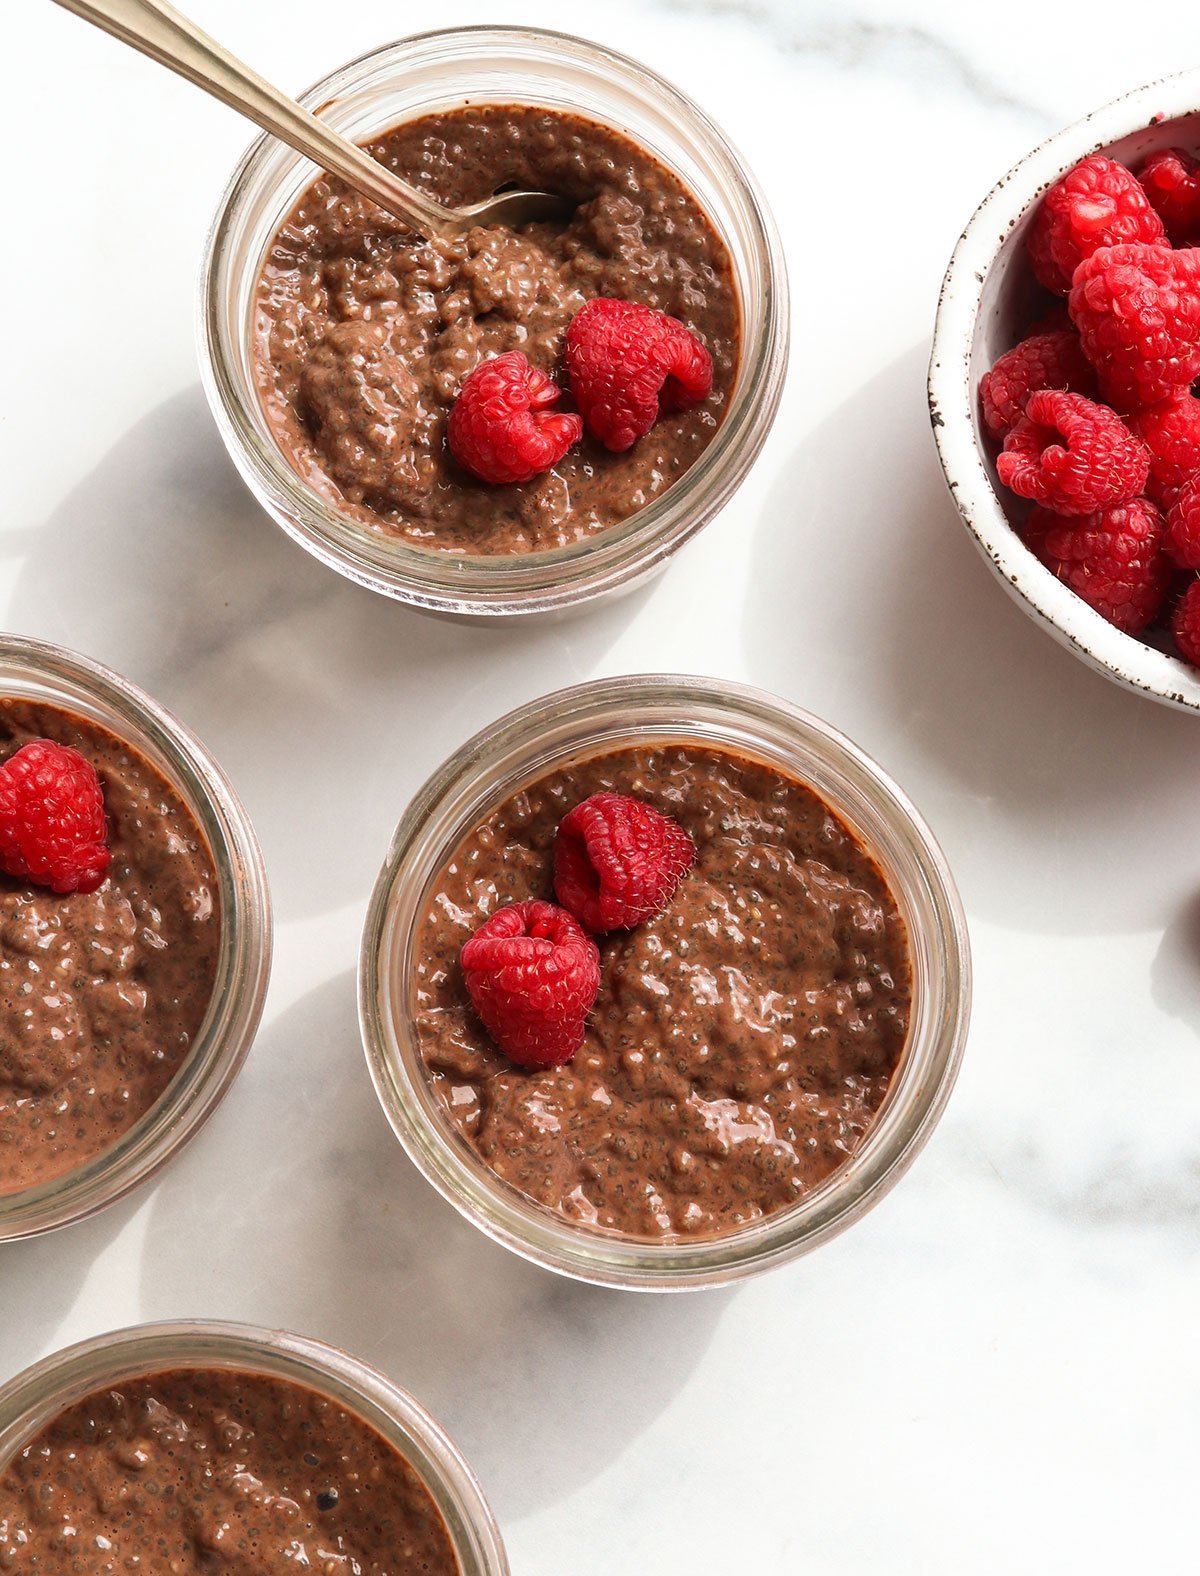 4 jars of chocolate chia pudding topped with fresh raspberries.